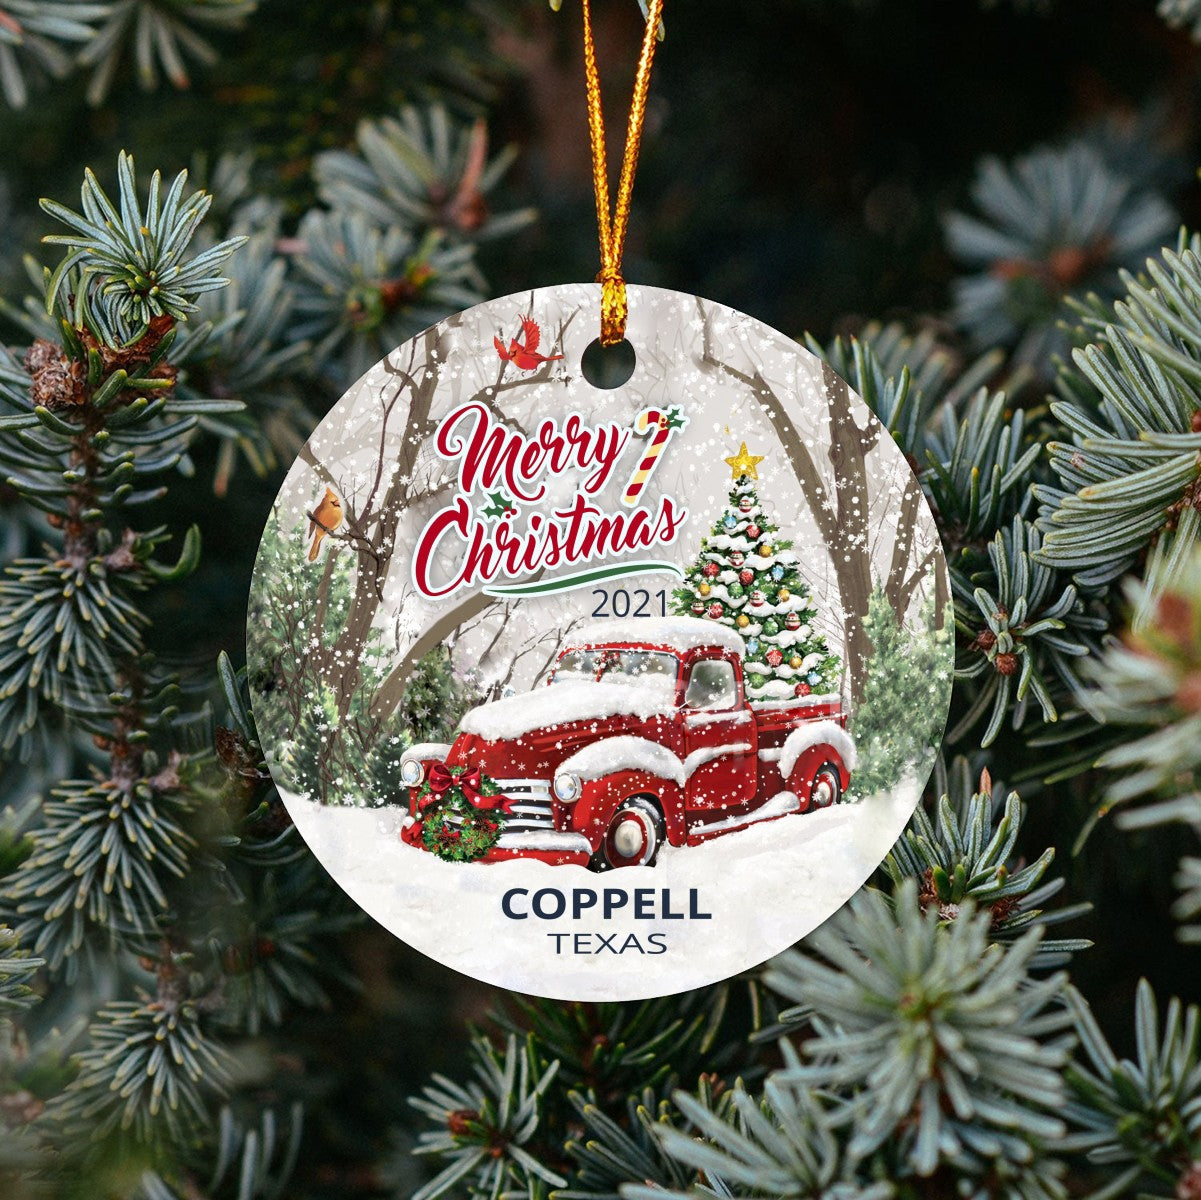 Christmas Tree Ornaments Coppell - Ornament Customize With Name City And State Coppell Texas TX - Red Truck Xmas Ornaments 3'' Plastic Gift For Family, Friend And Housewarming